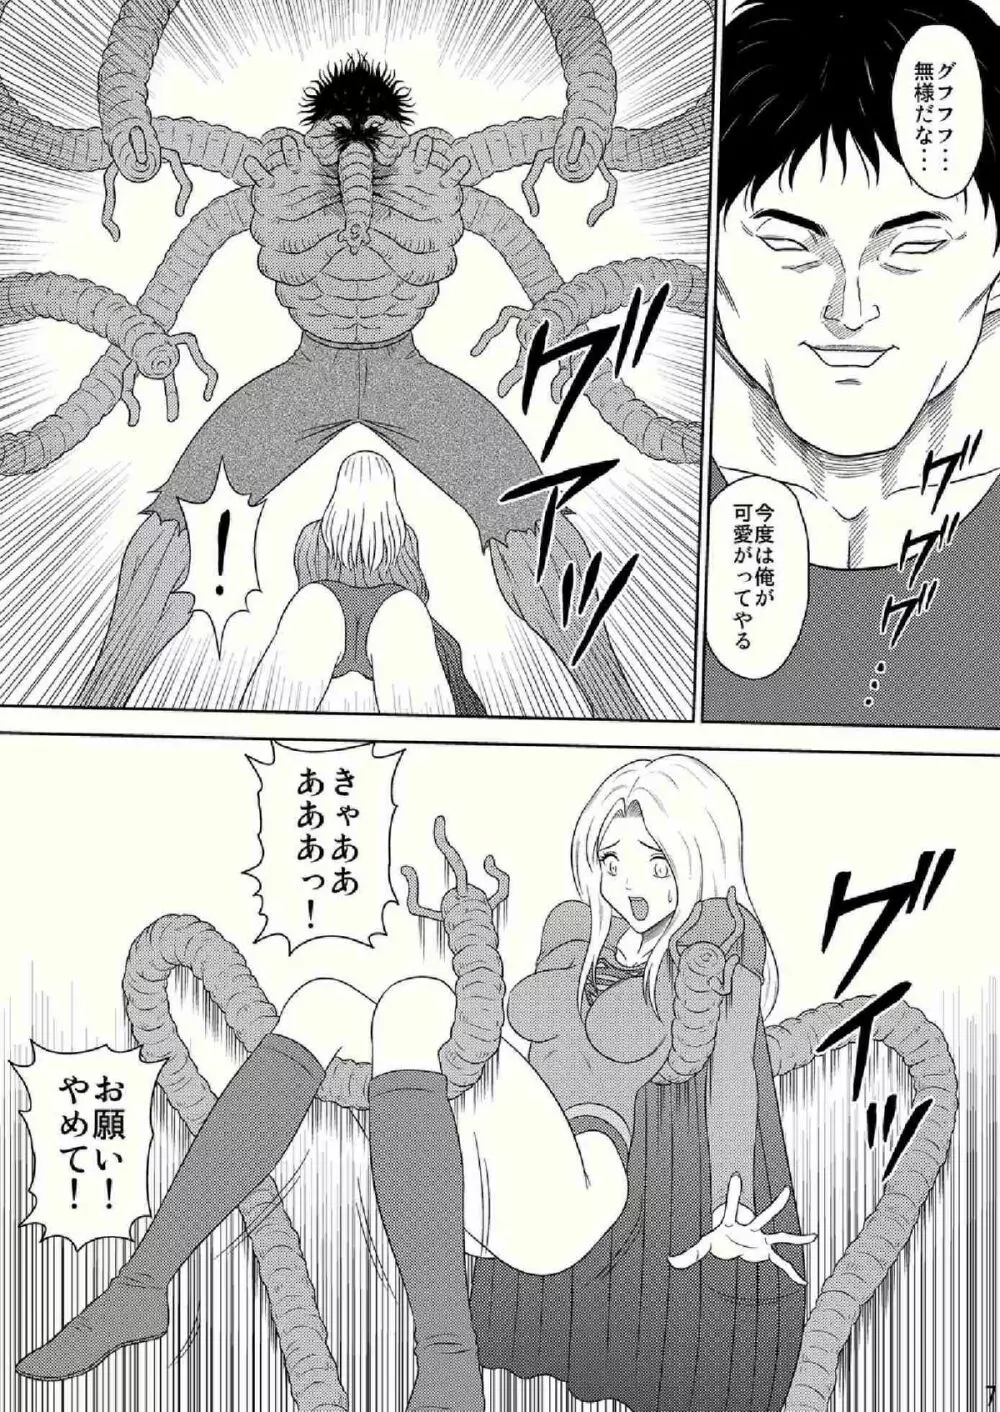 Toukikoubou vol.2 SUPER GIRL - Humiliation and Execution - Page.7